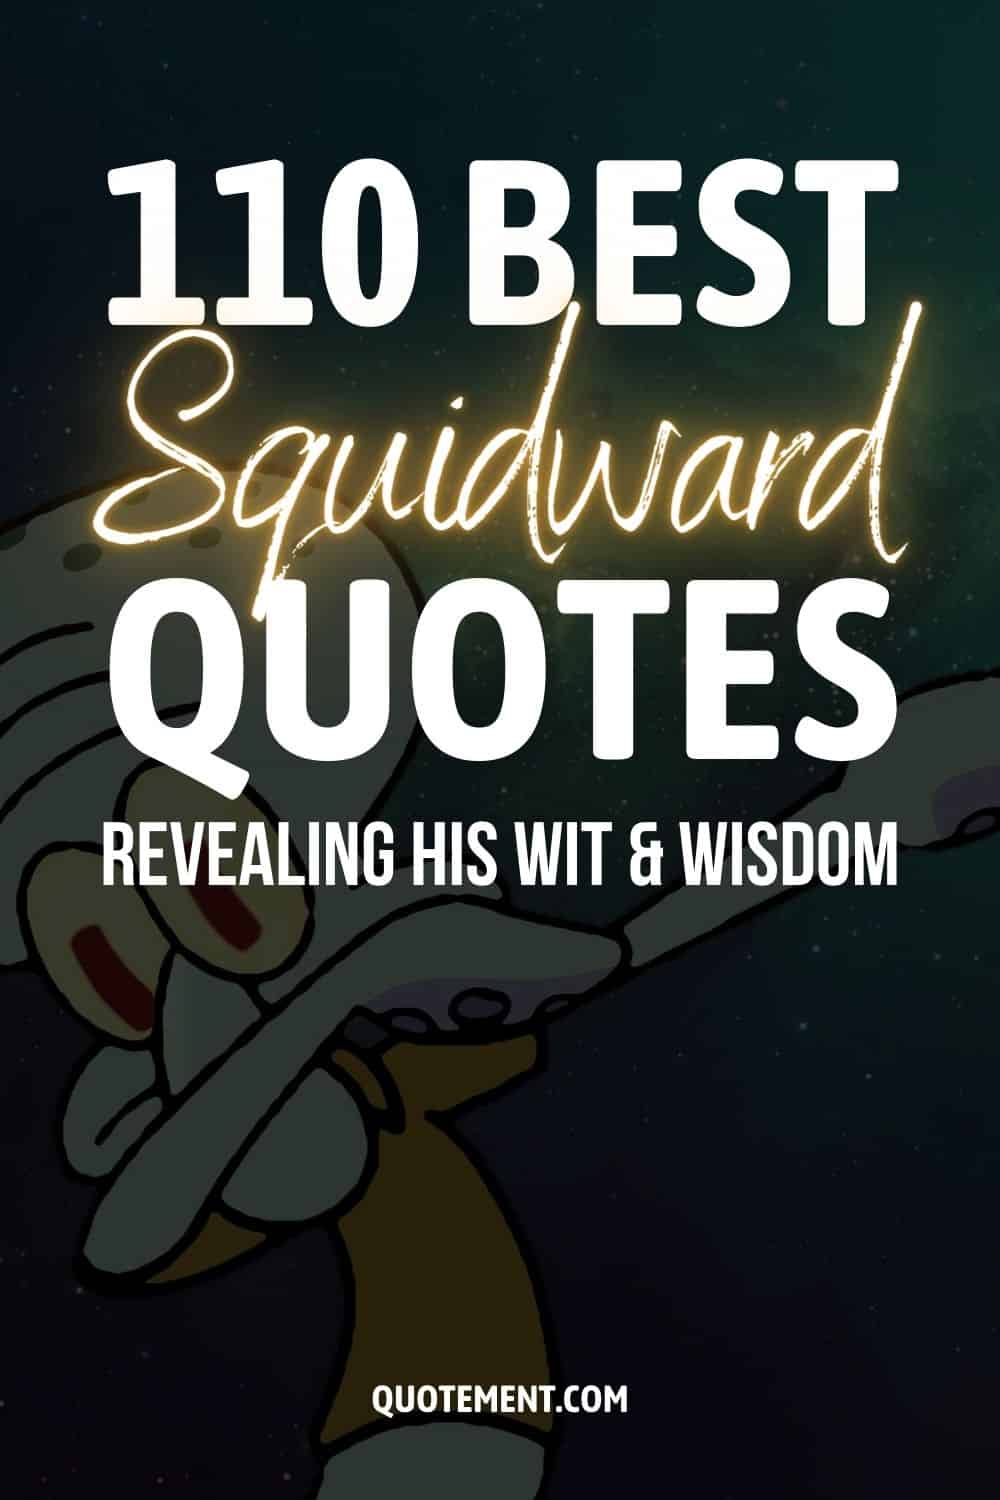 110 Best Squidward Quotes Revealing His Wit and Wisdom